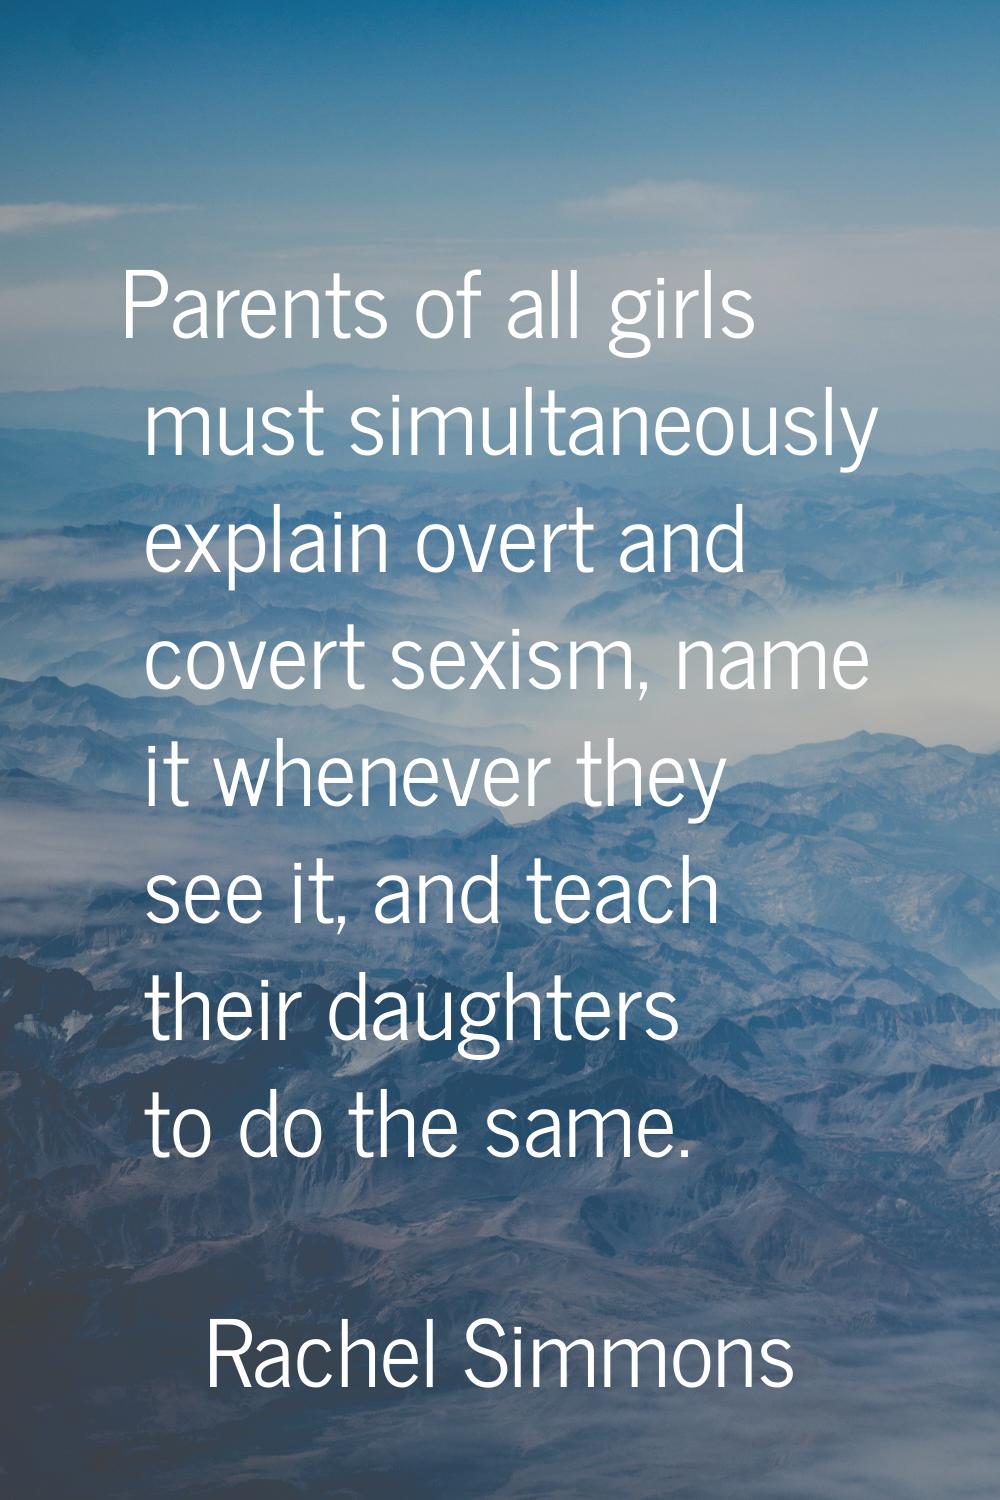 Parents of all girls must simultaneously explain overt and covert sexism, name it whenever they see